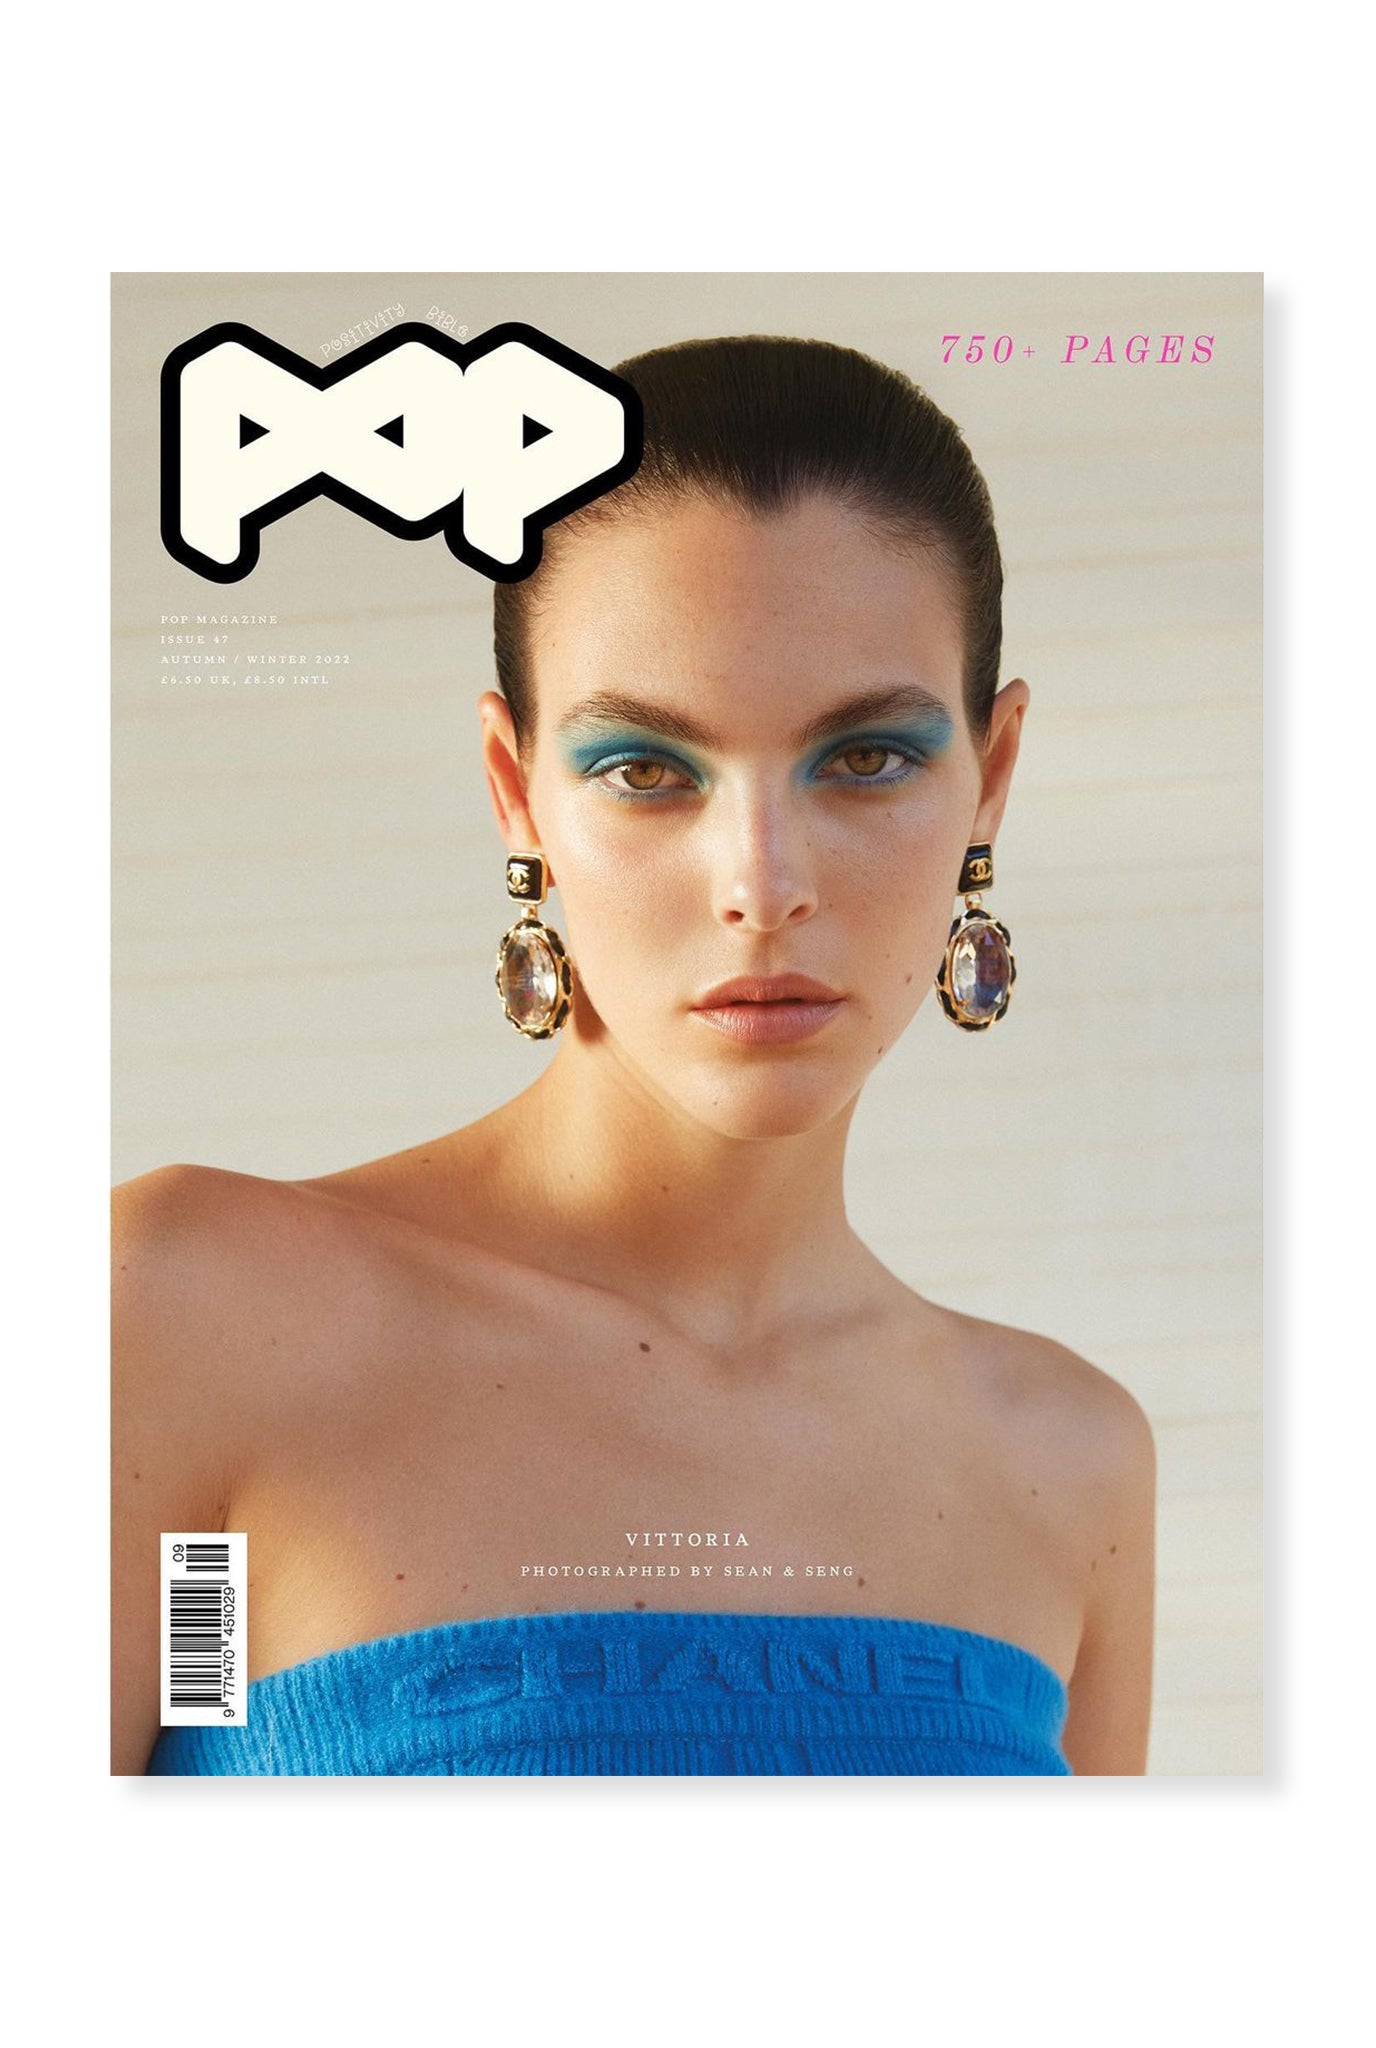 POP, Issue 47